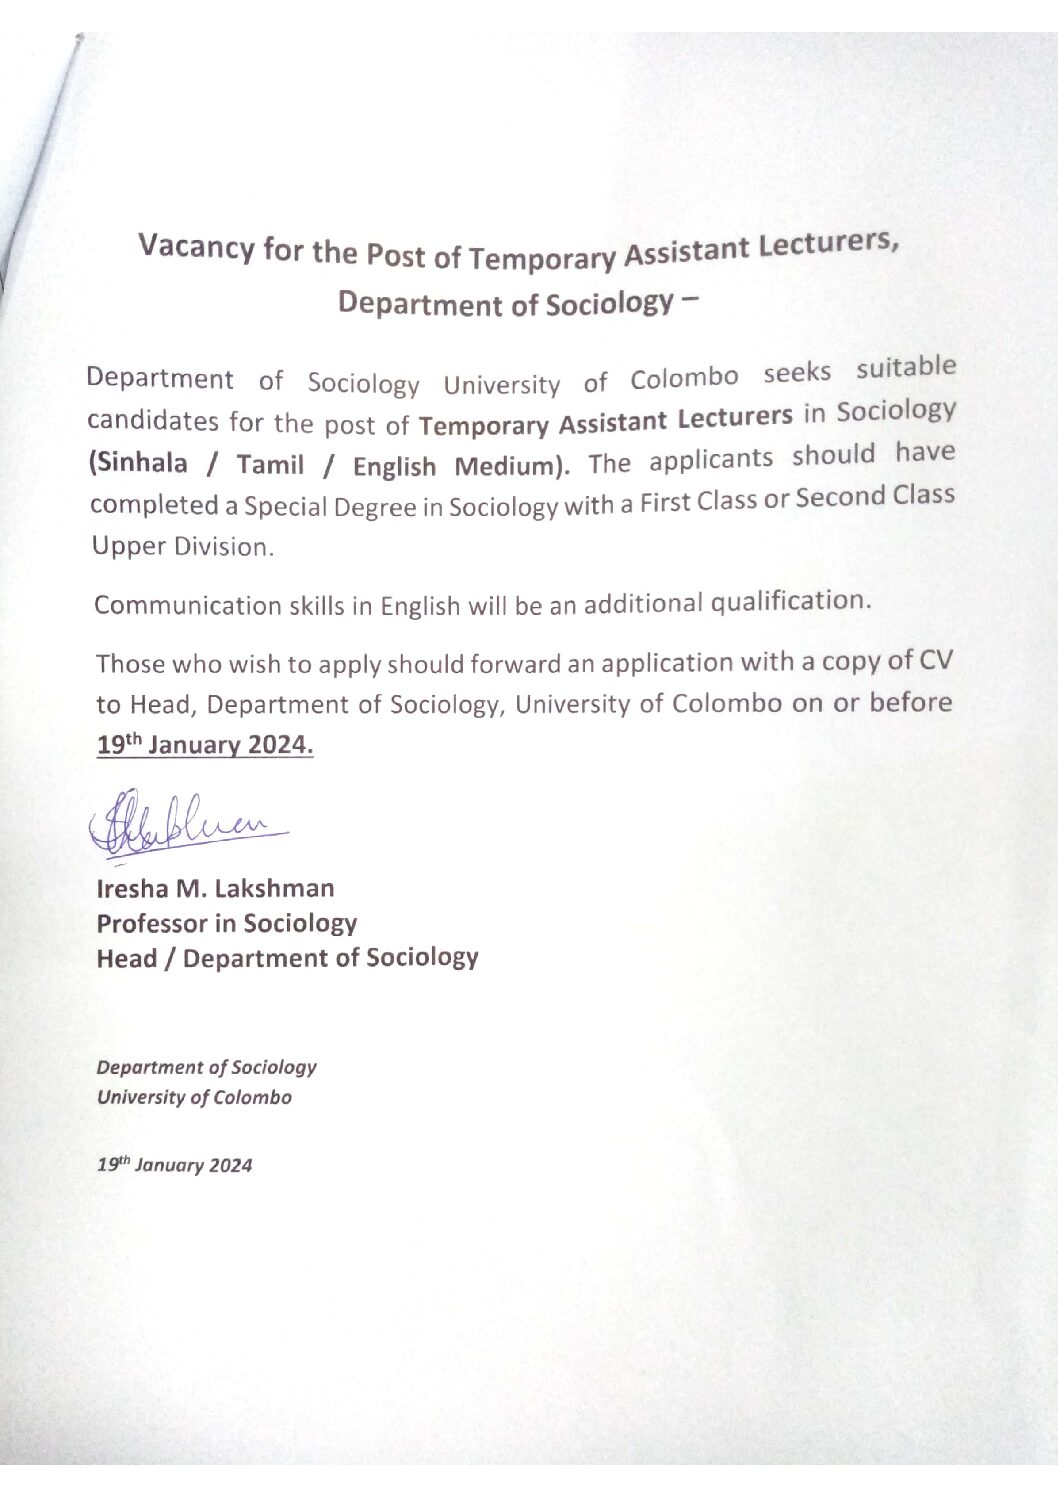 Post of Temporary Assistant Lecturer (Sinhala/Tamil/English)